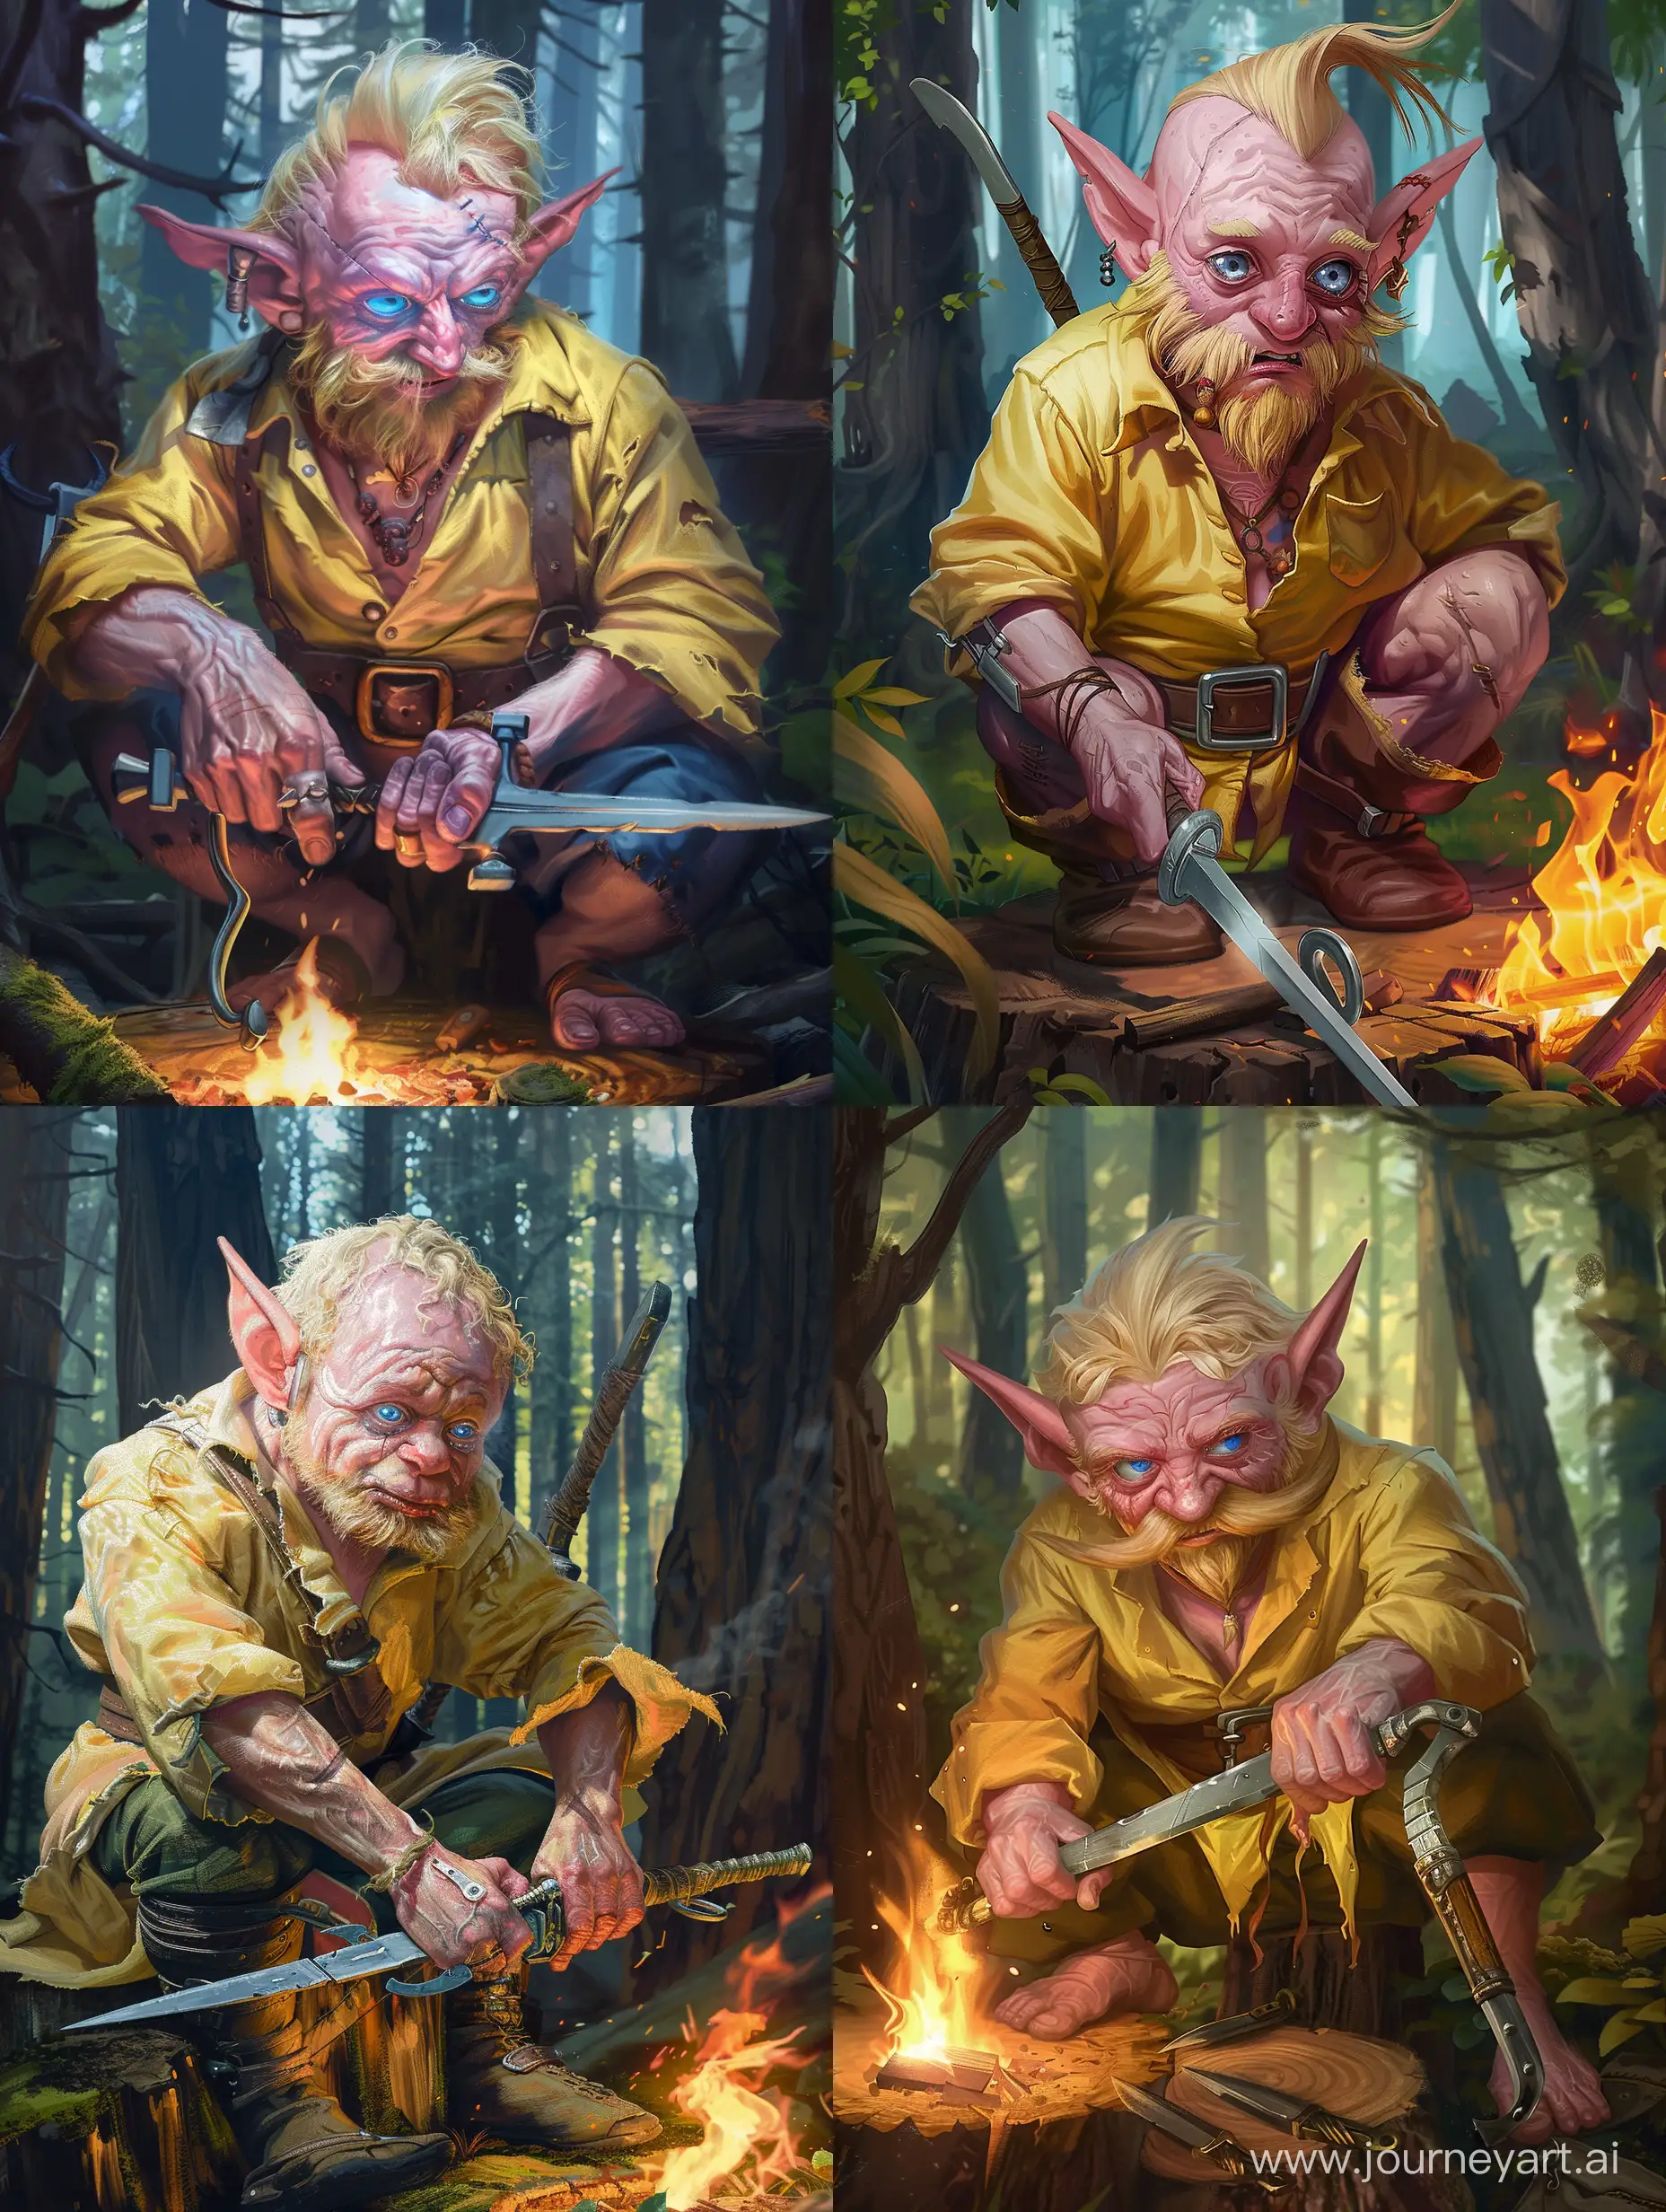 A dwarf pirate with a hook prosthesis, light pink skin, blue eyes, blond hair and a dirty blond beard, a pirate saber on his belt. He is wearing a yellowish cotton shirt with a loose collar. He is sitting on a stump near a campfire in the forest and sharpening his pirate saber